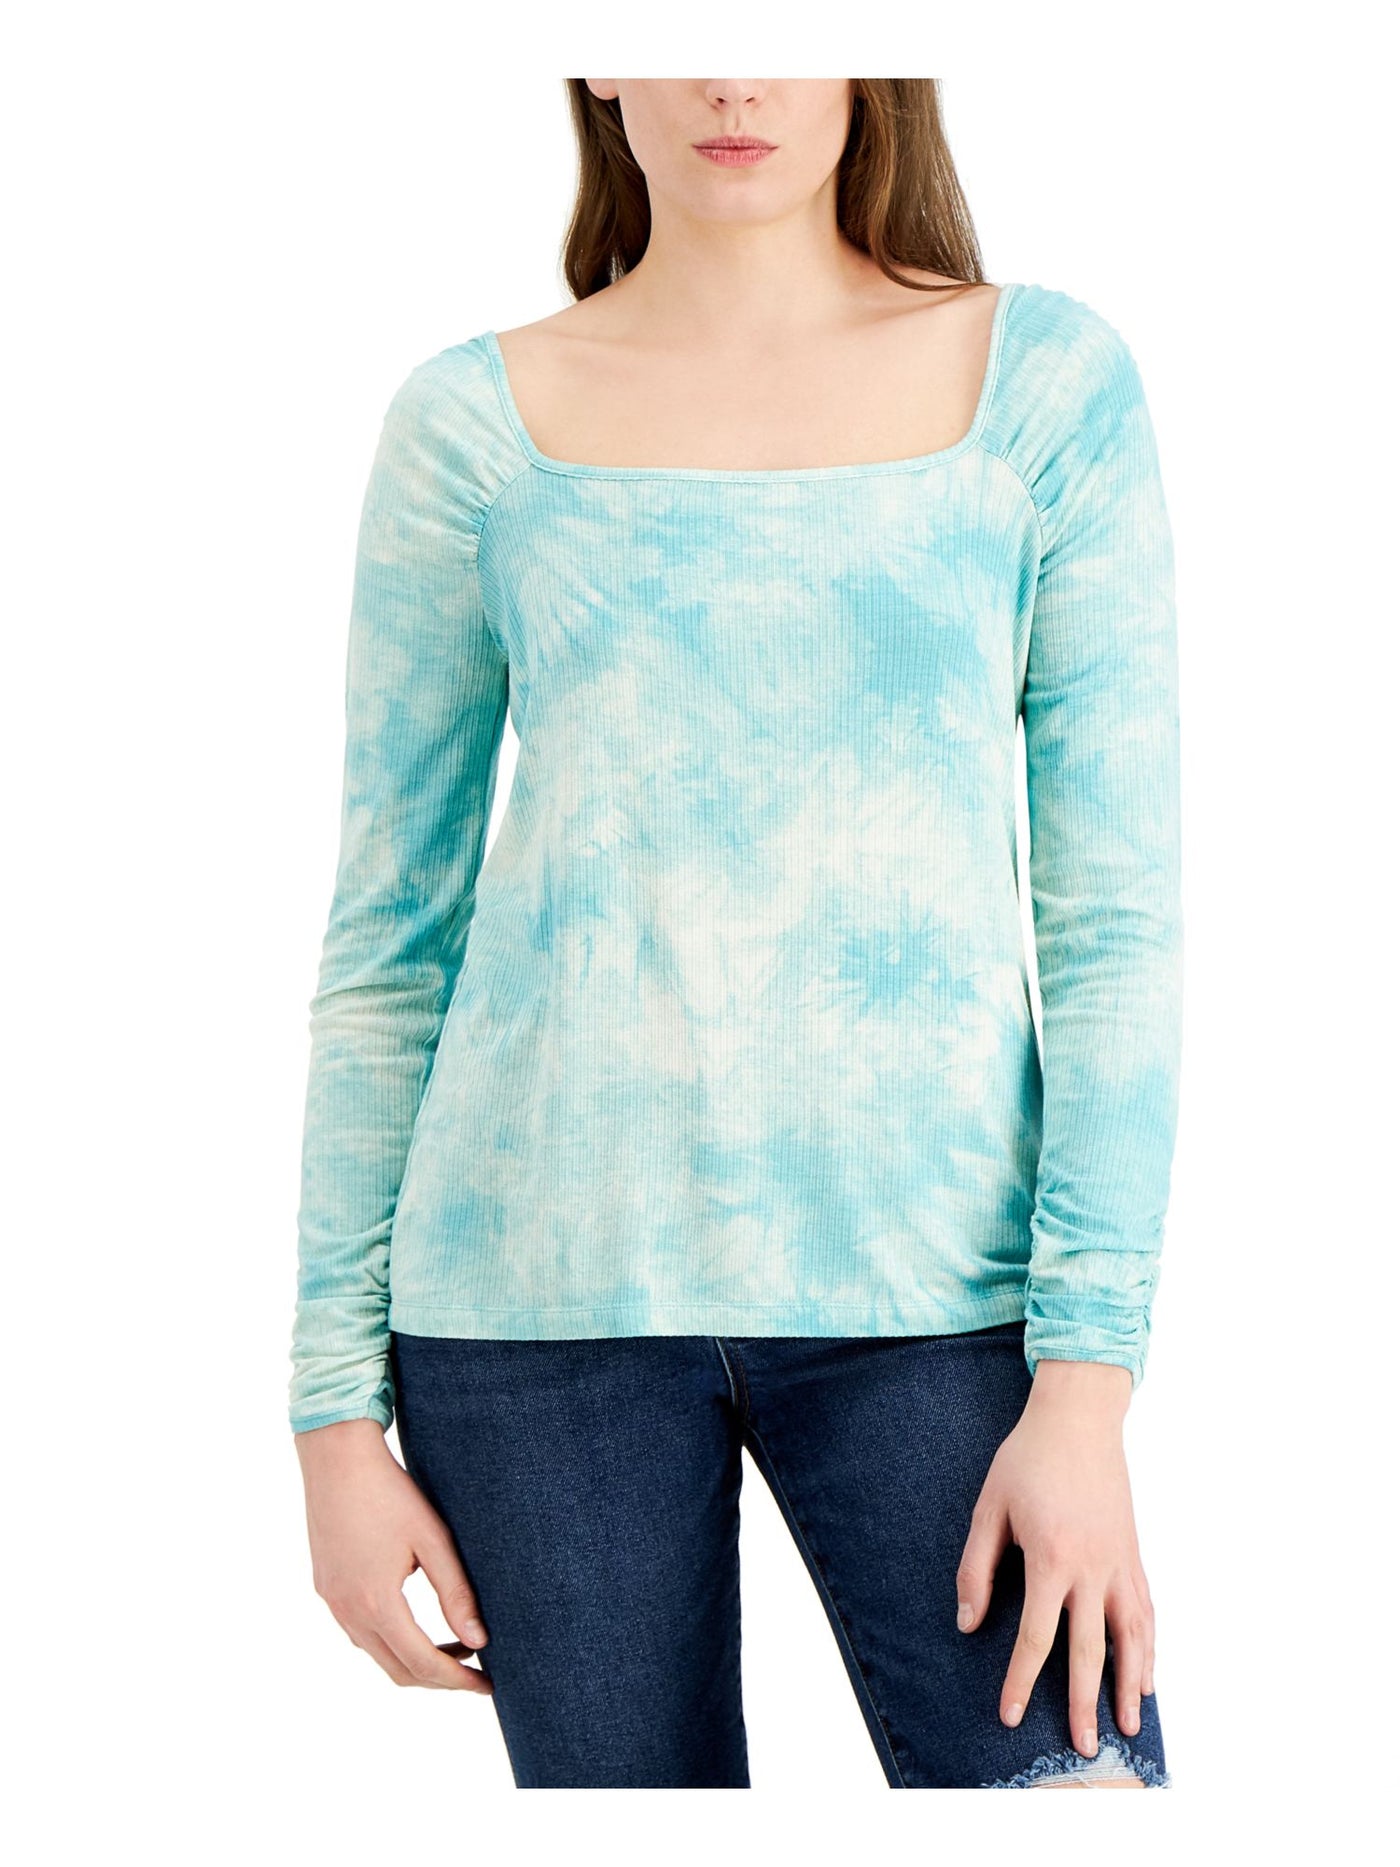 FEVER Womens Aqua Ribbed Tie Dye Long Sleeve Square Neck Top S